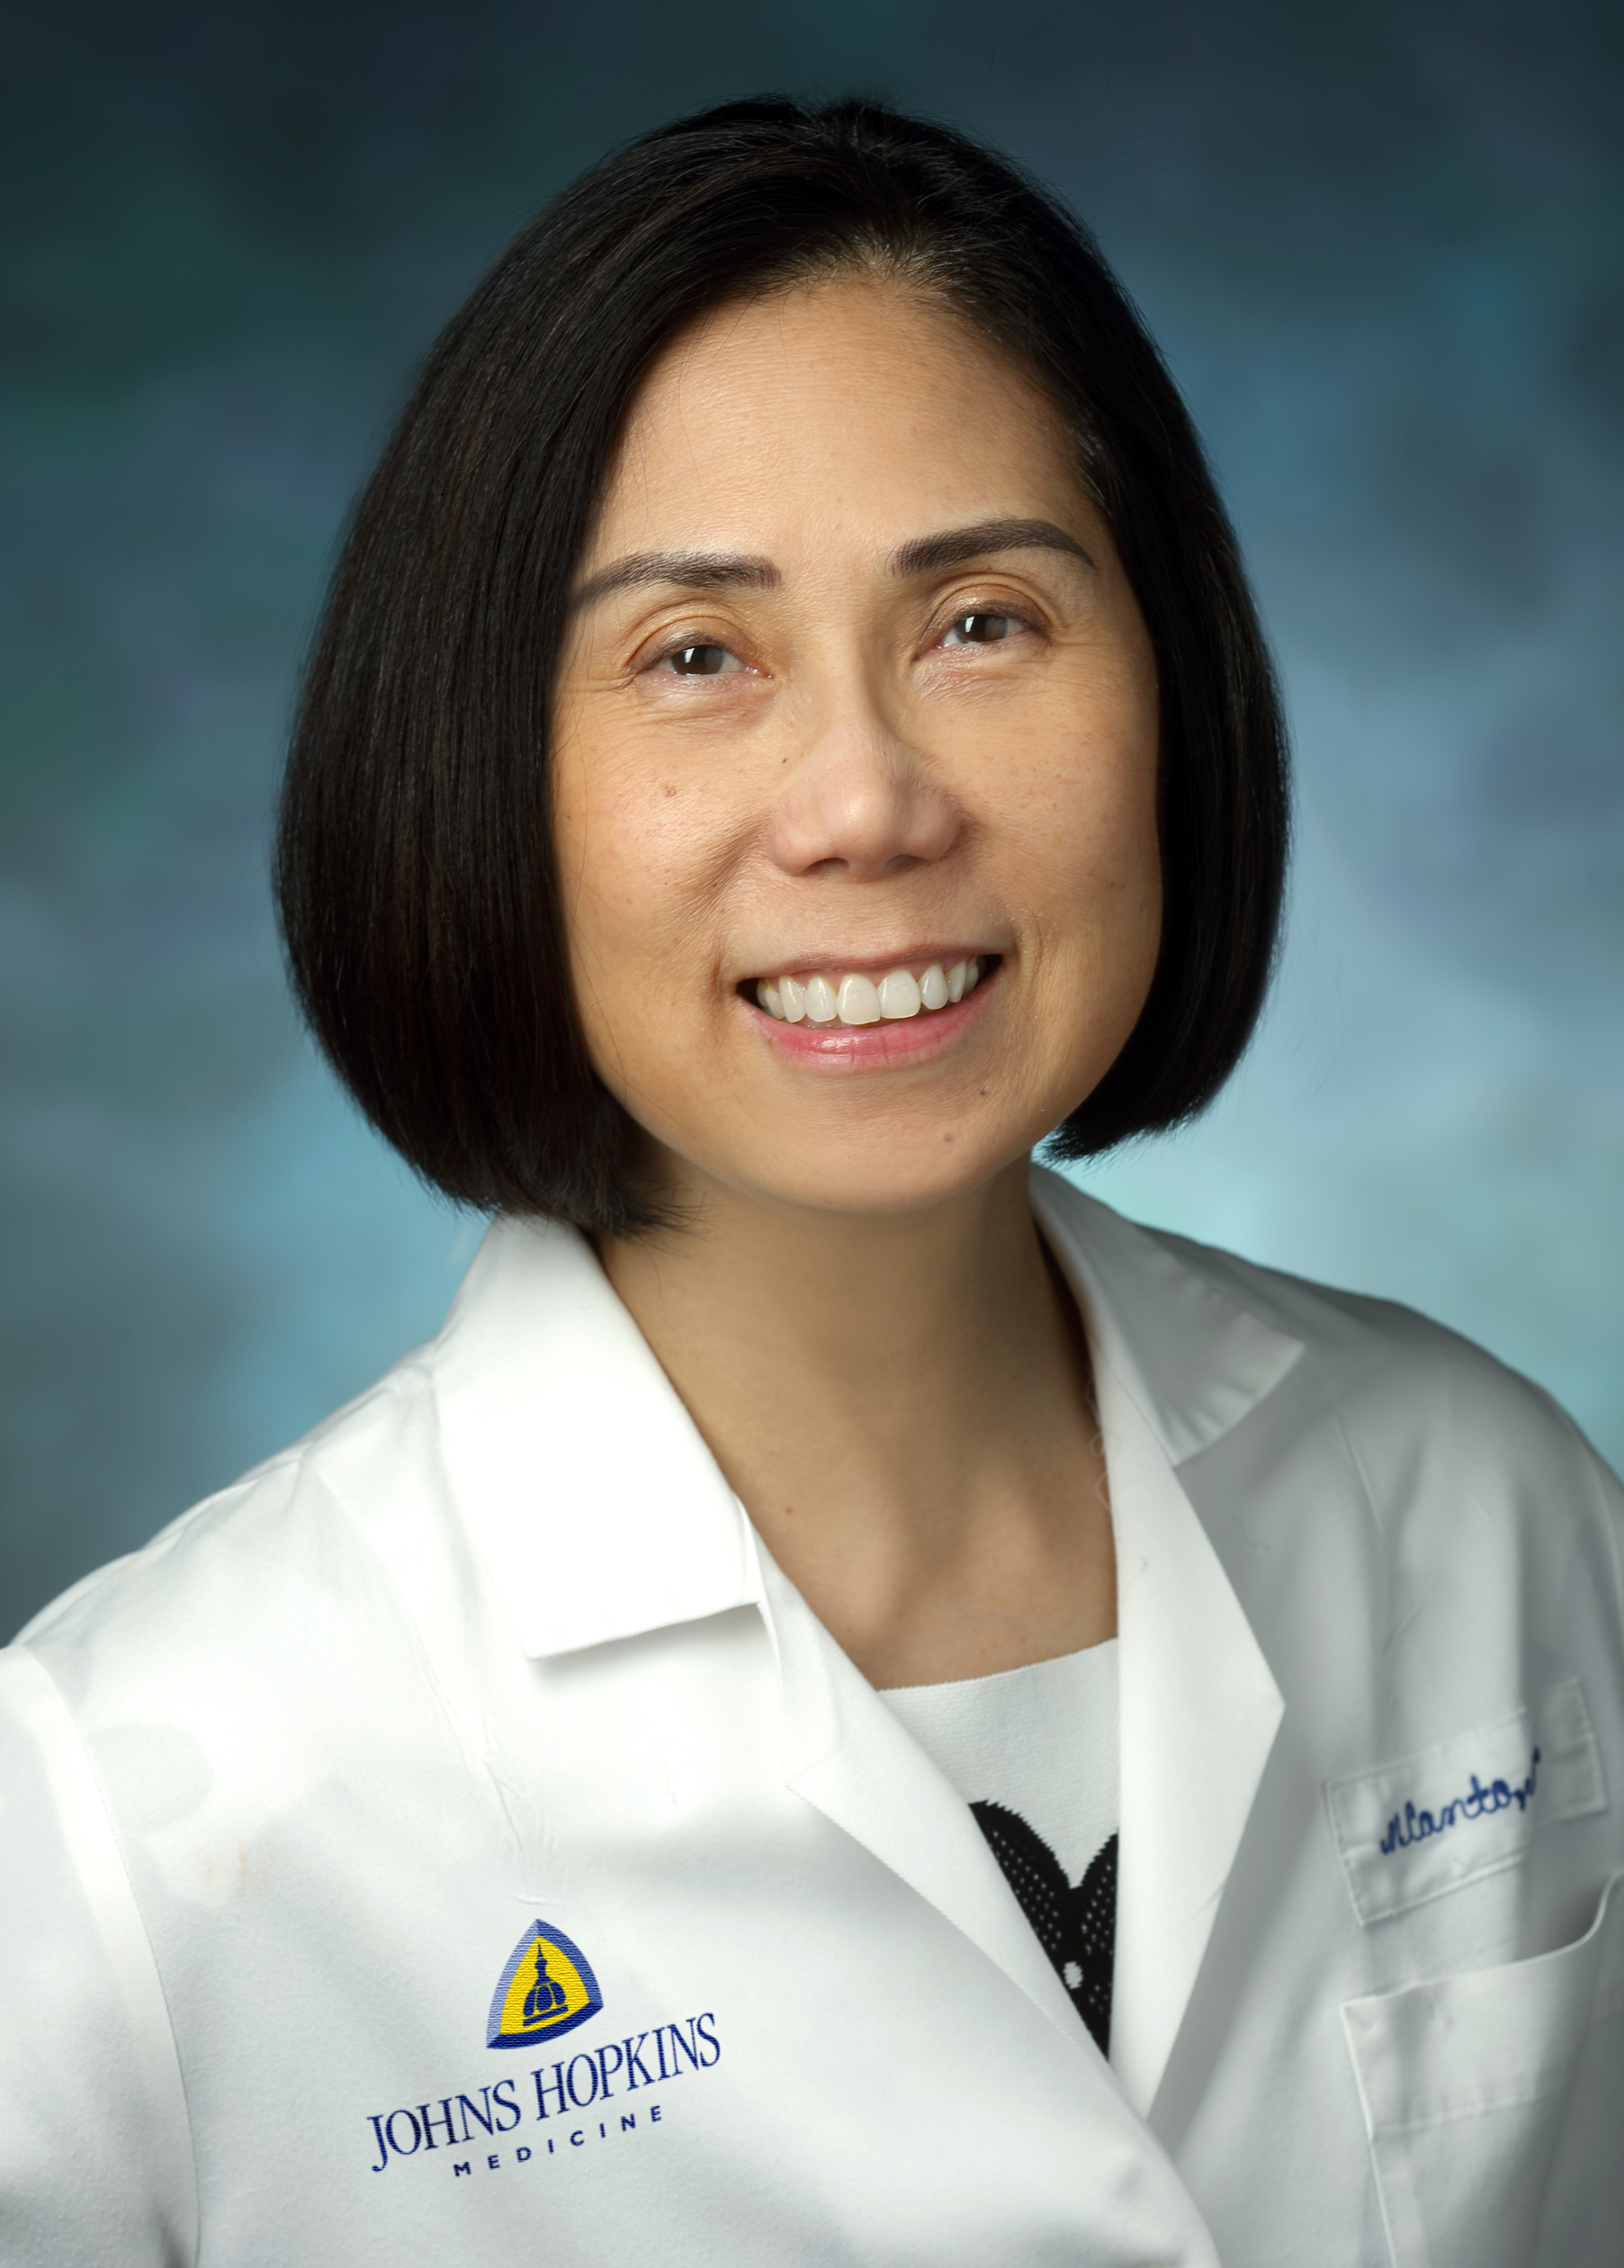 Portrait of Marcia Canto wearing white lab coat